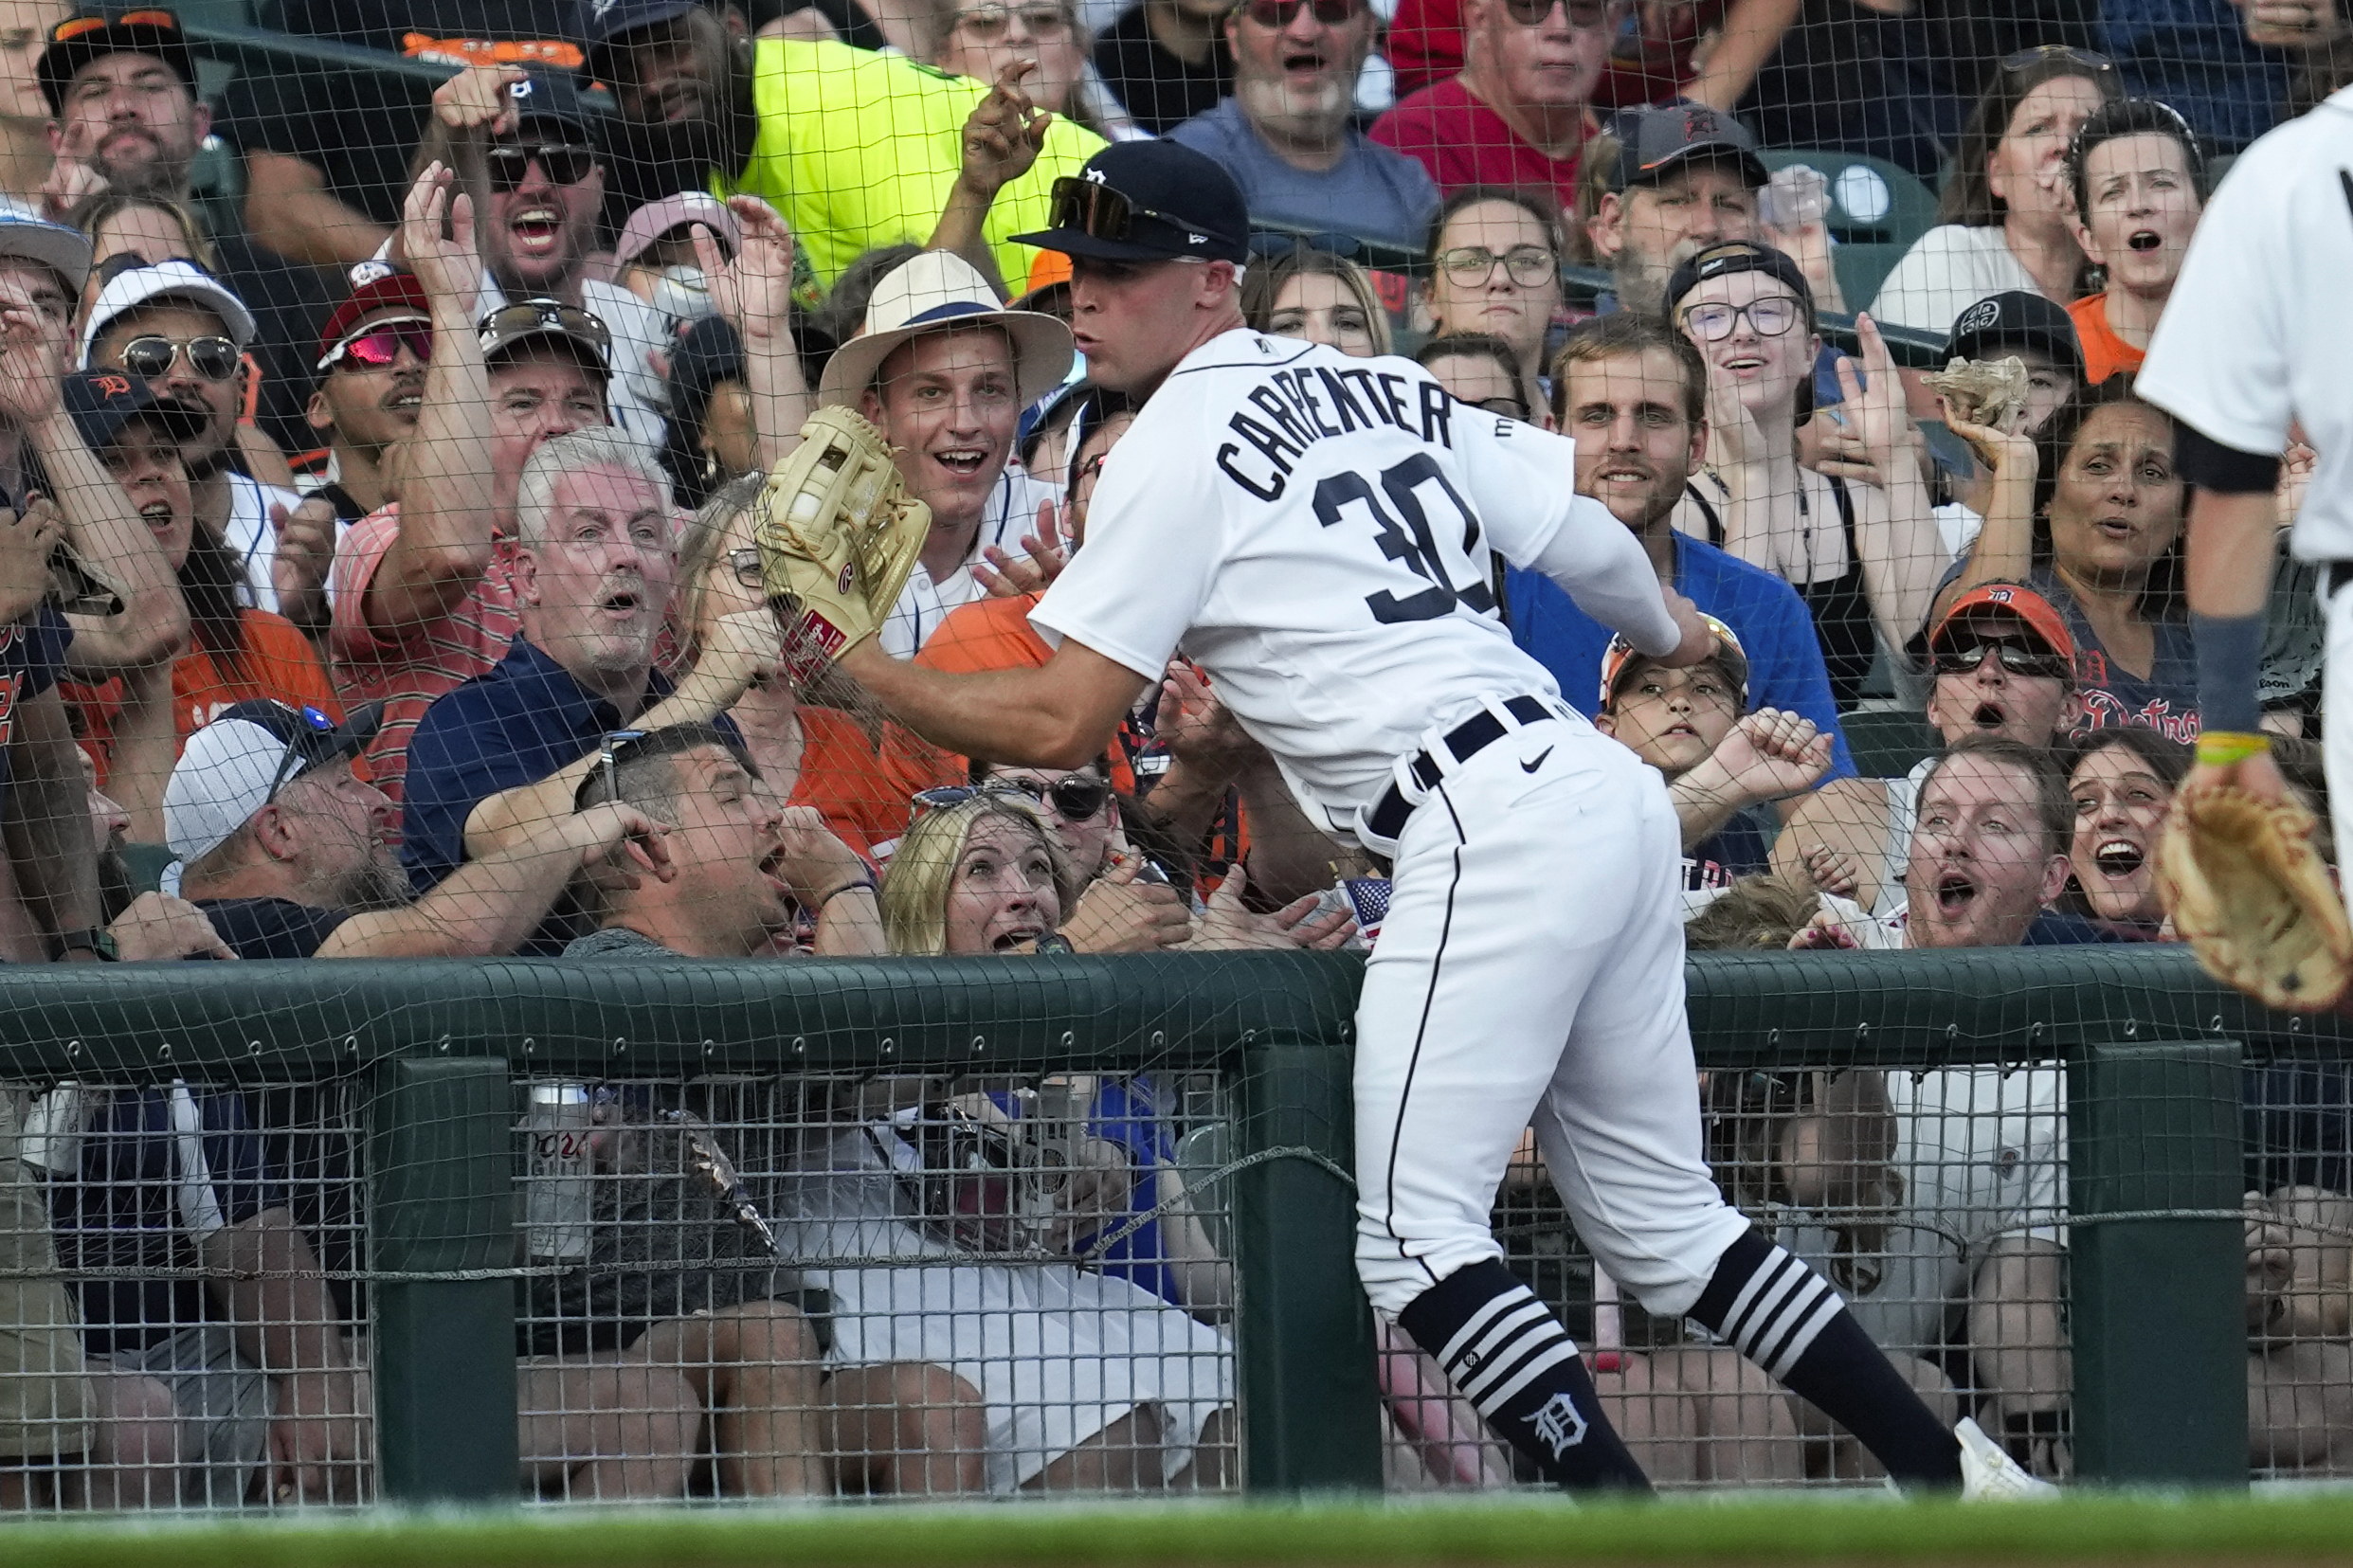 Max Kepler's two-run triple helps Twins top Tigers